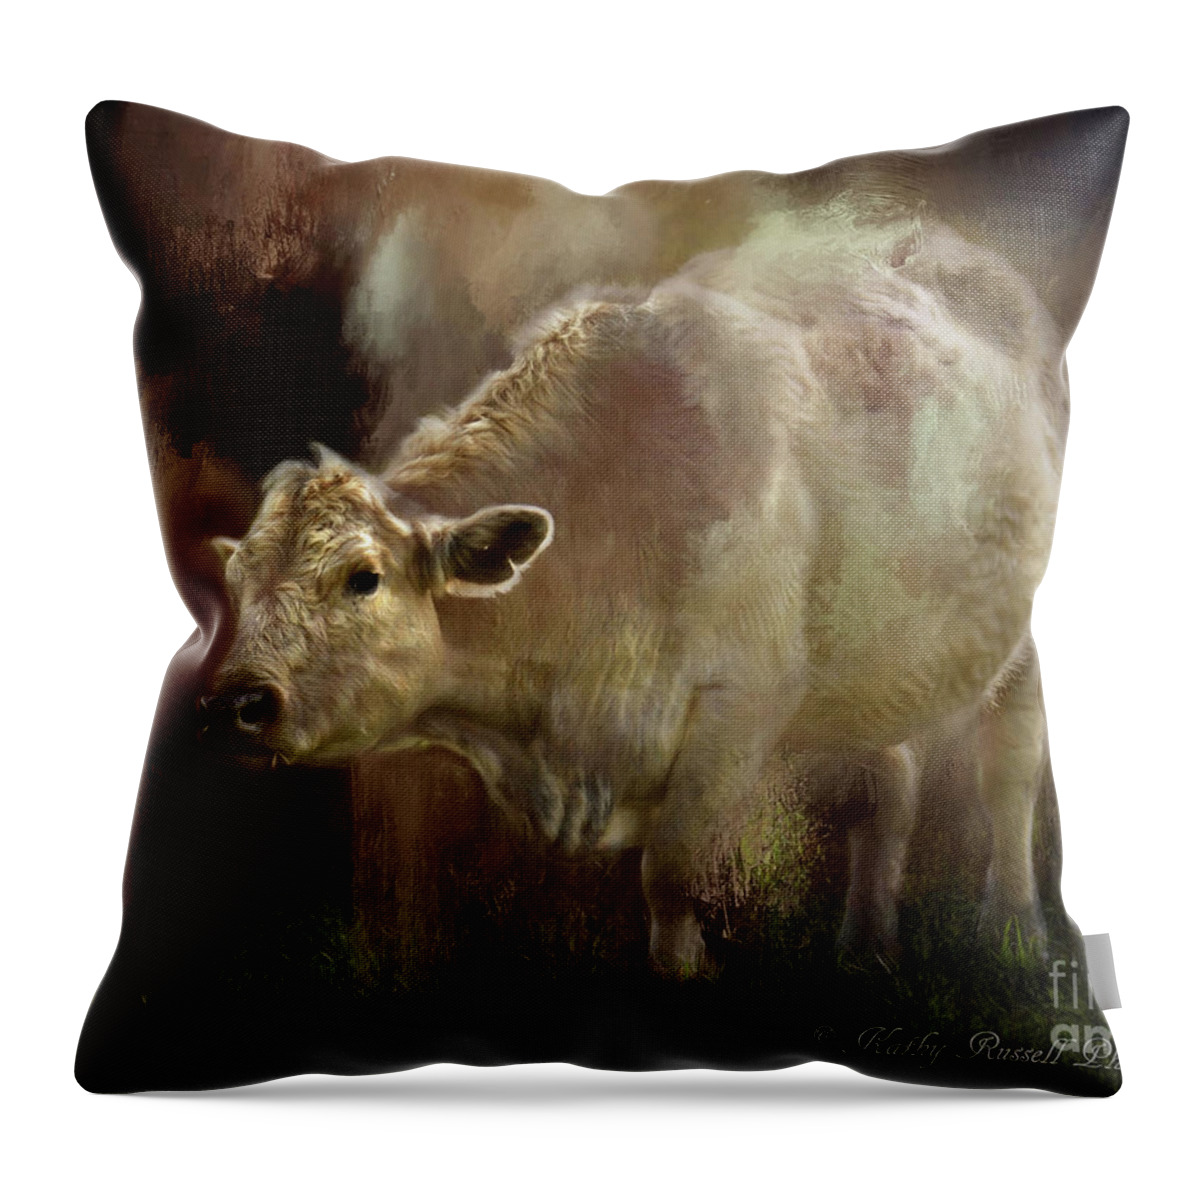 Cow Throw Pillow featuring the photograph Big White Cow by Kathy Russell